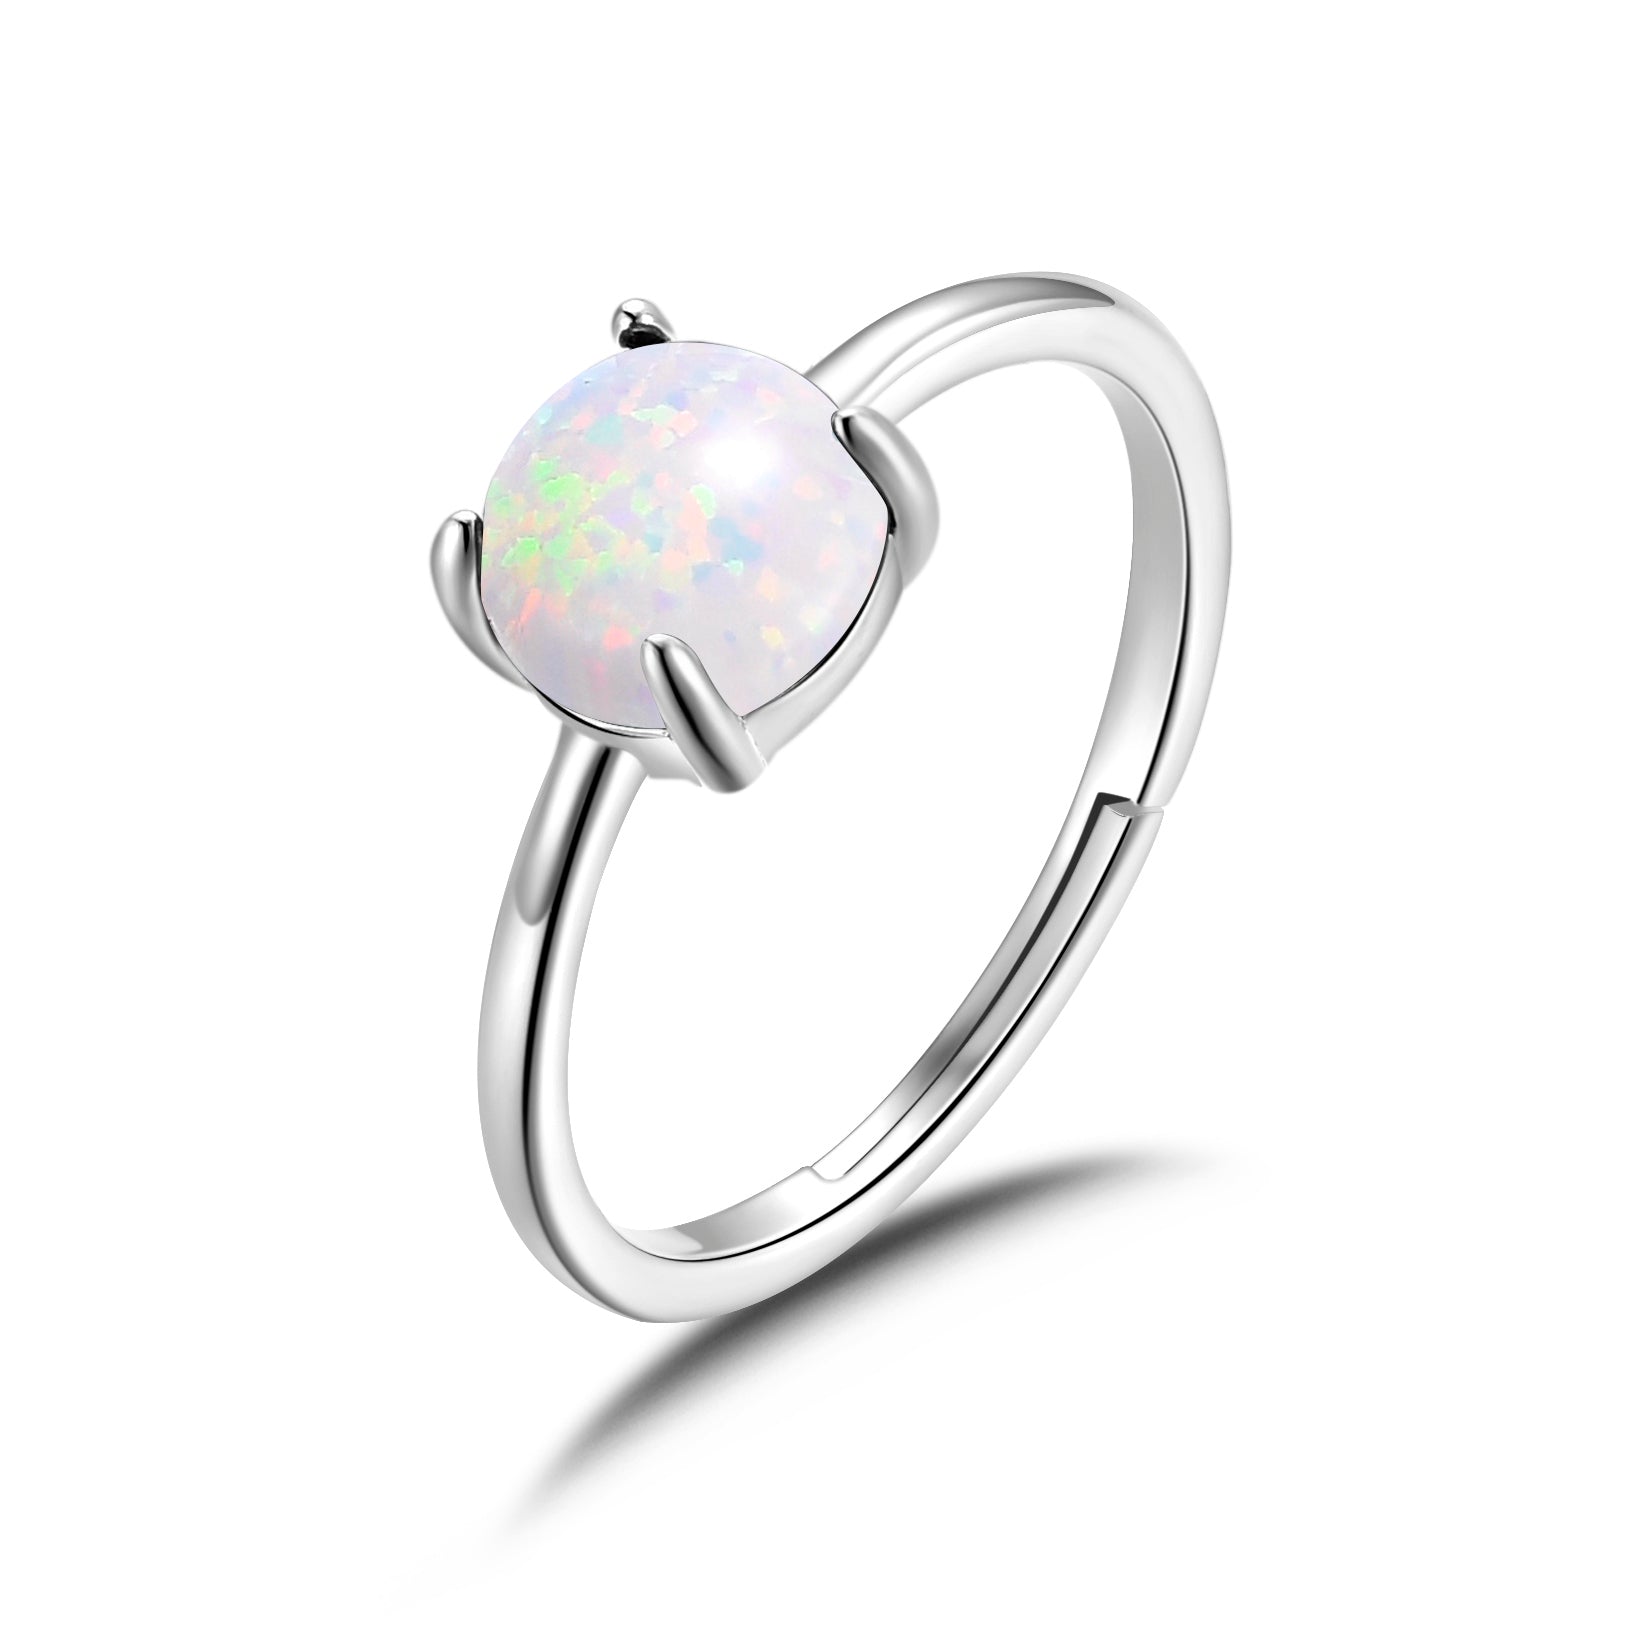 Synthetic White Opal Ring by Philip Jones Jewellery